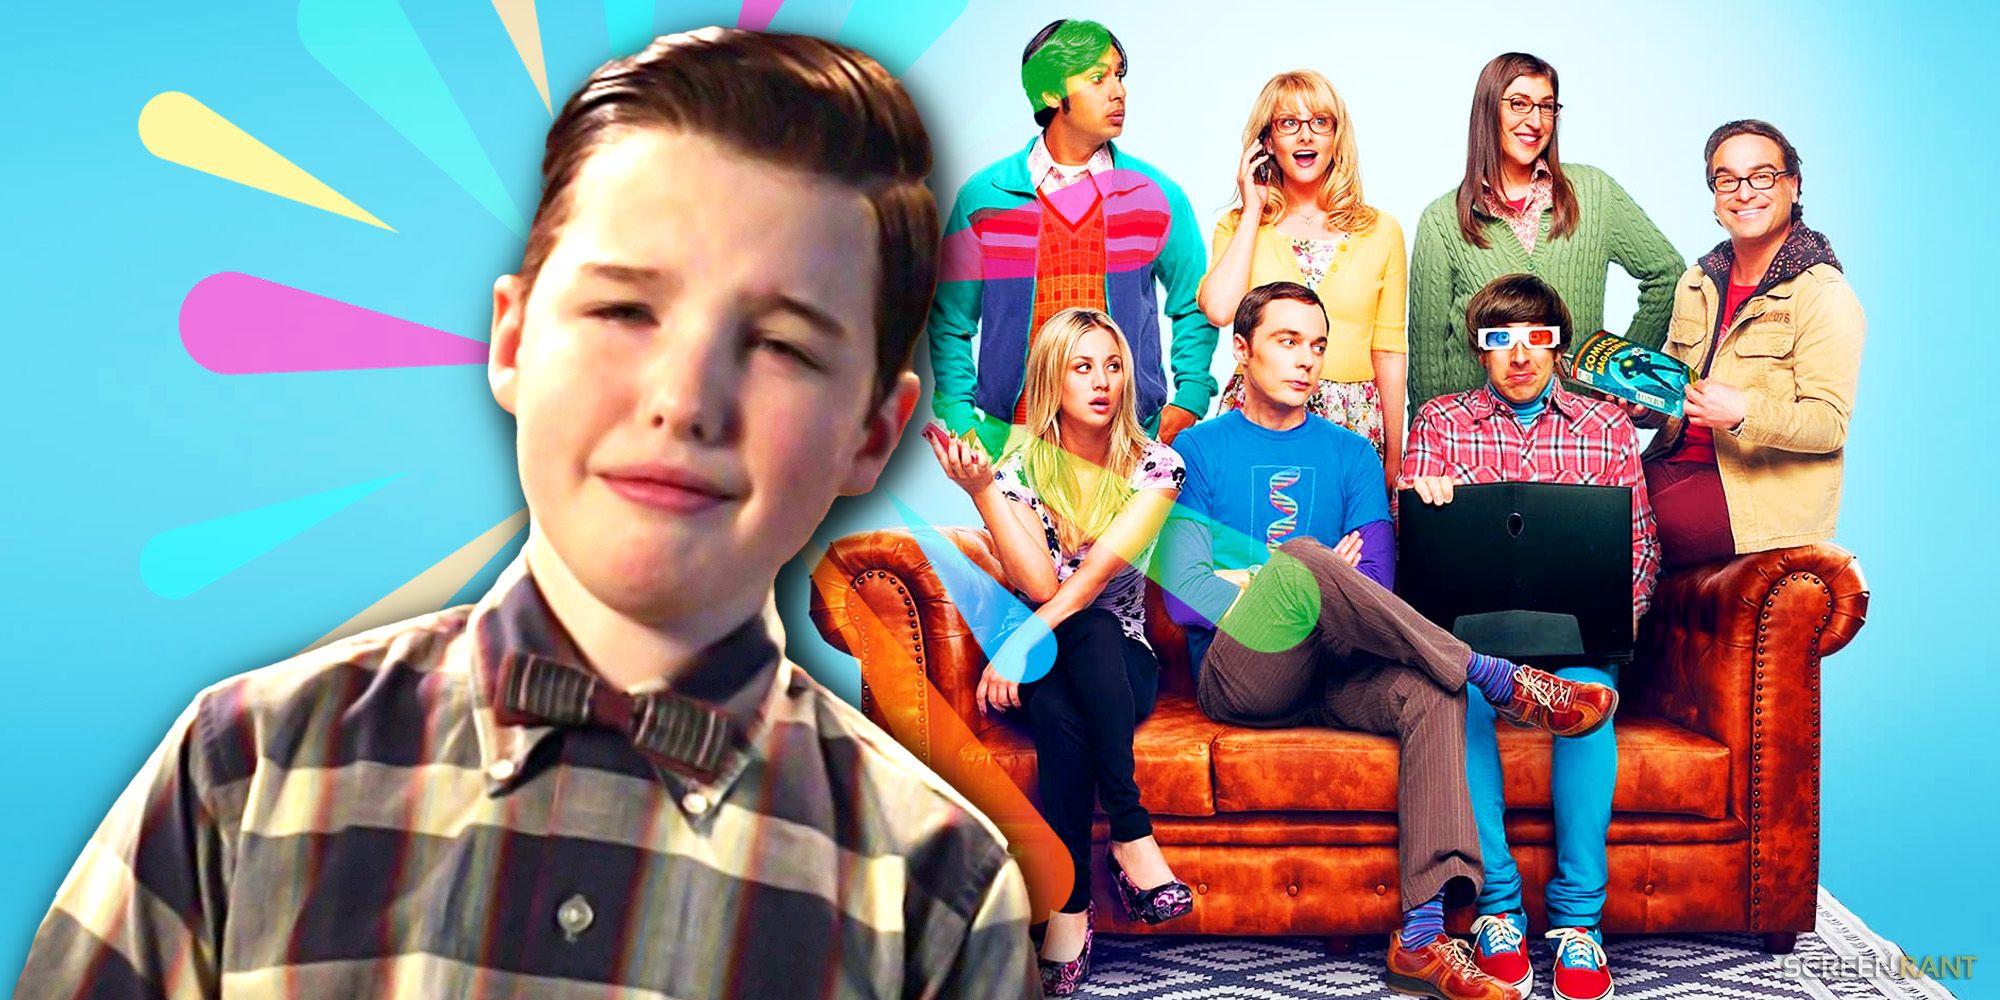 Iain Armitage as Sheldon in Young Sheldon and the cast of The Big Bang Theory